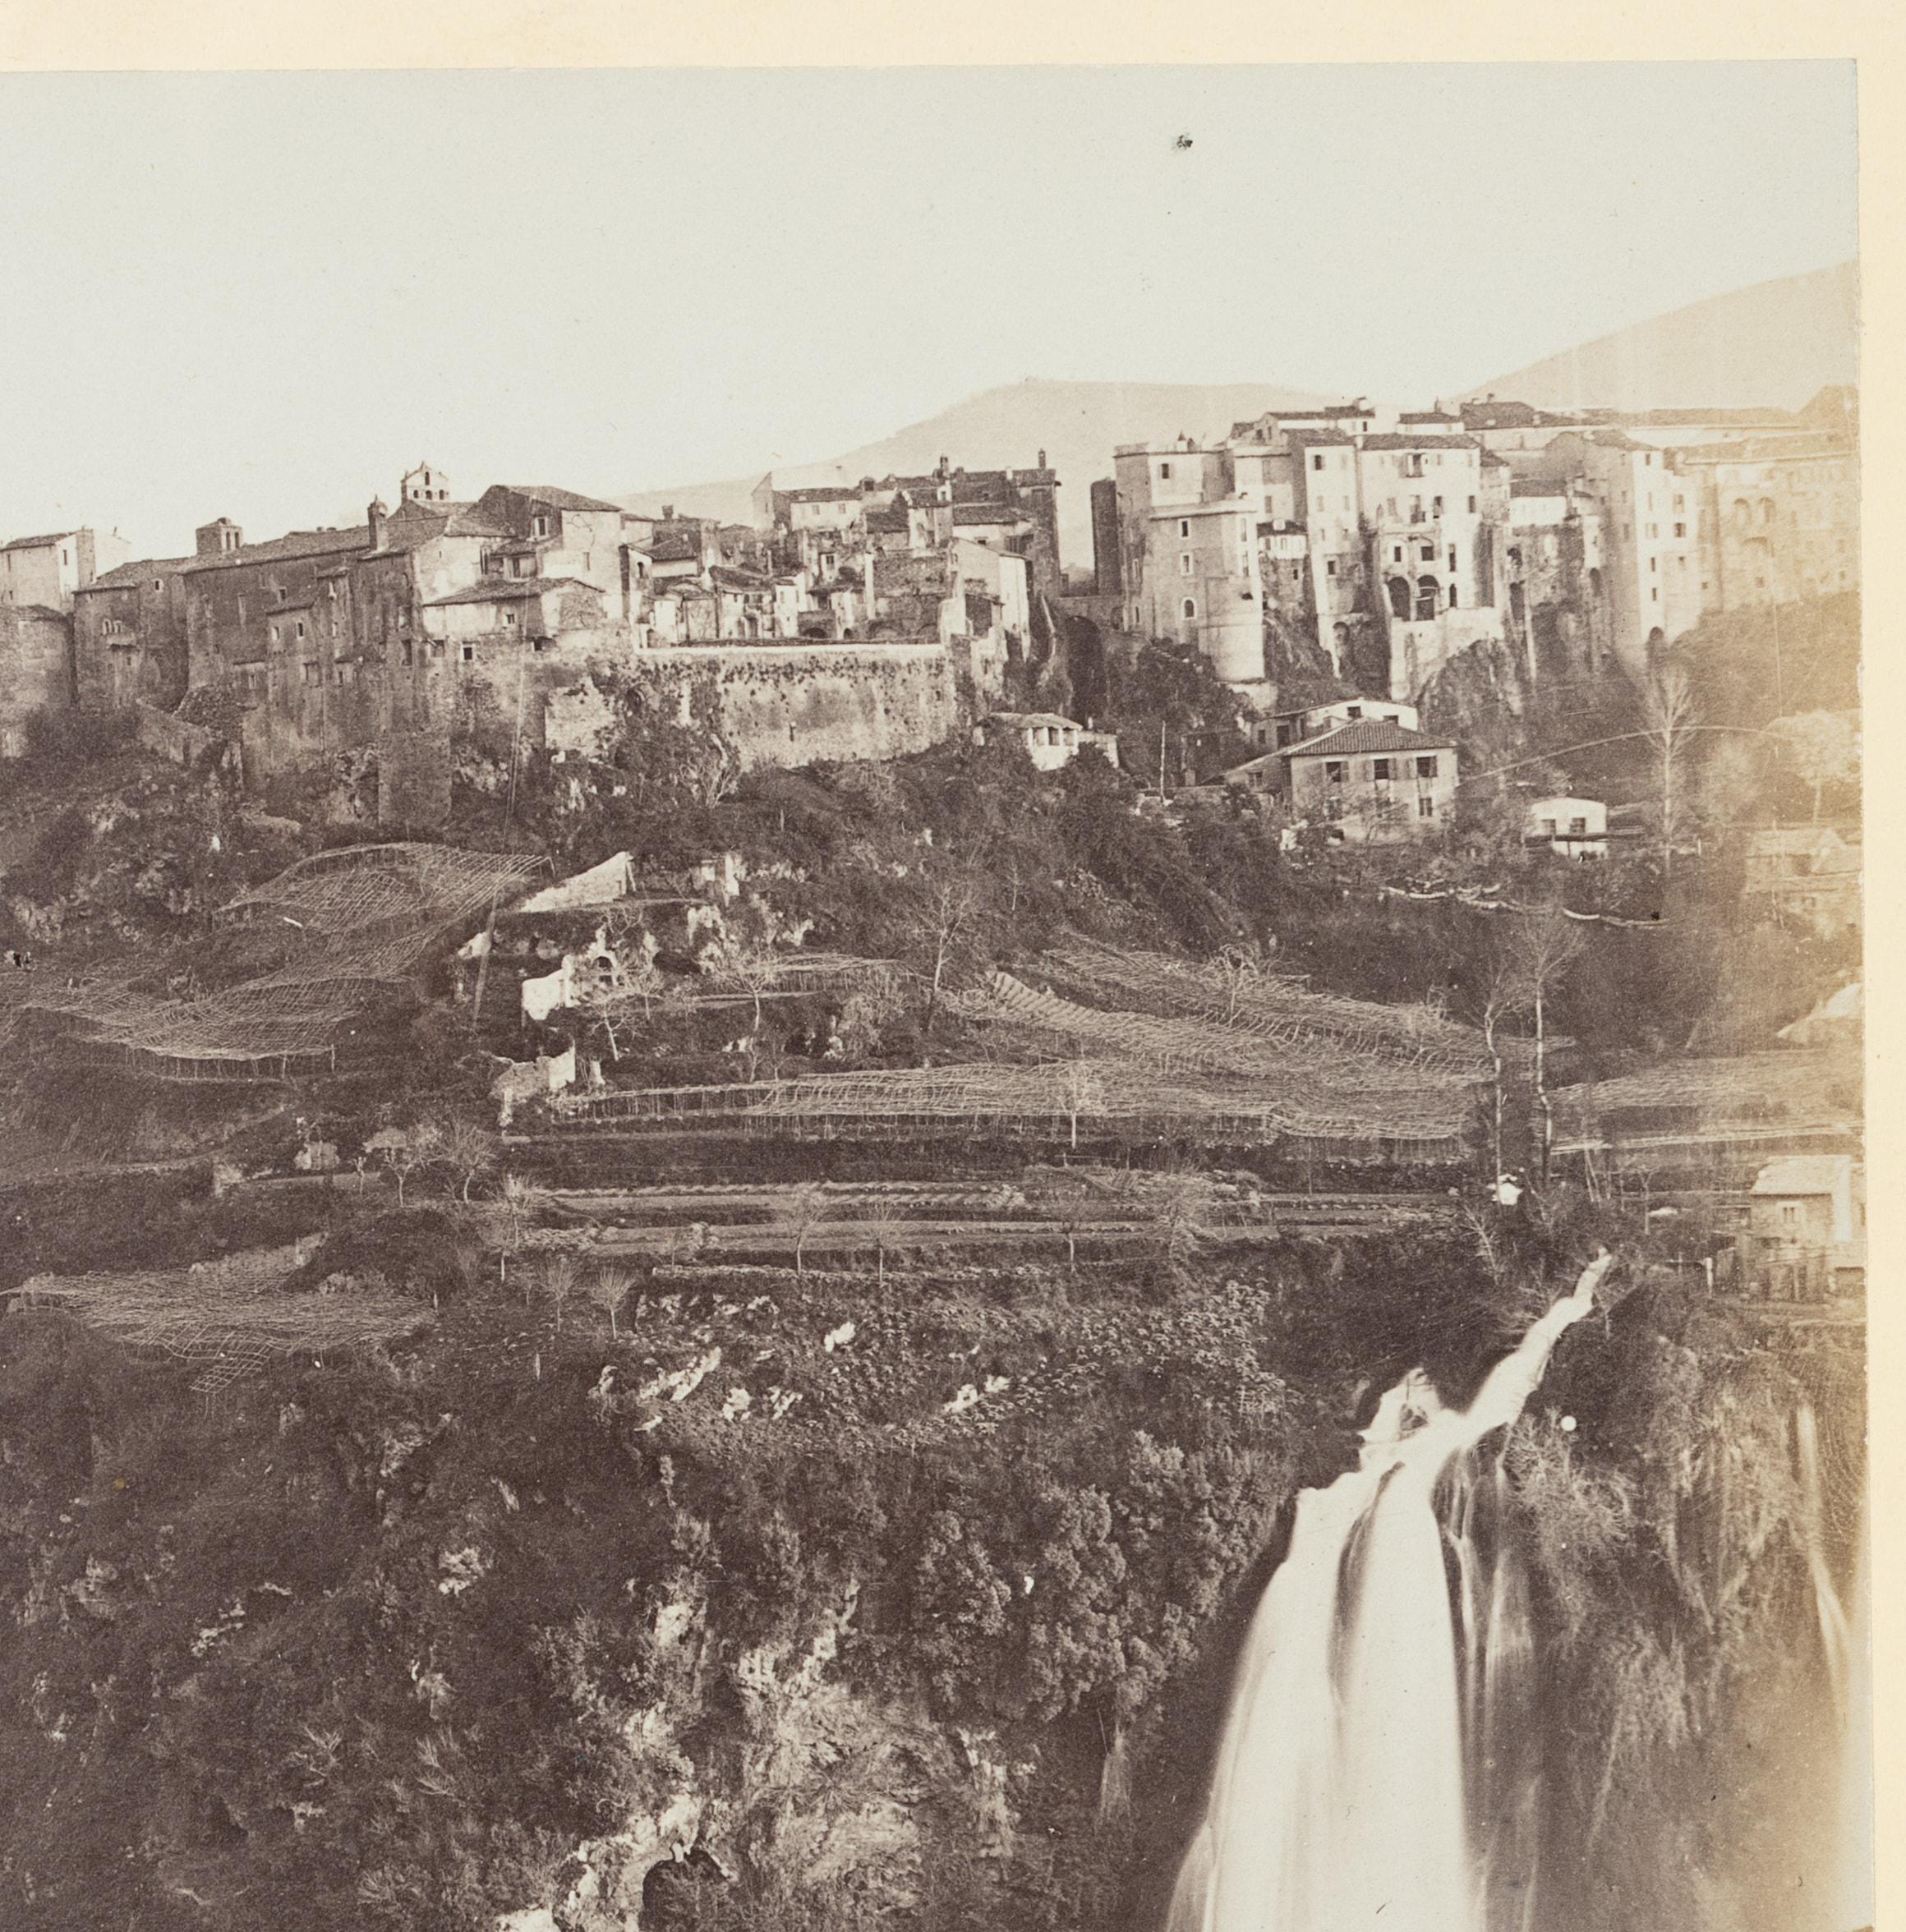 Fratelli Alinari (19th century) Circle: View of the spectacular gigantic waterfalls of Tivoli at the Villa Gregoriana, c. 1880, albumen paper print

Technique: albumen paper print, mounted on Cardboard

Inscription: At the lower part inscribed on